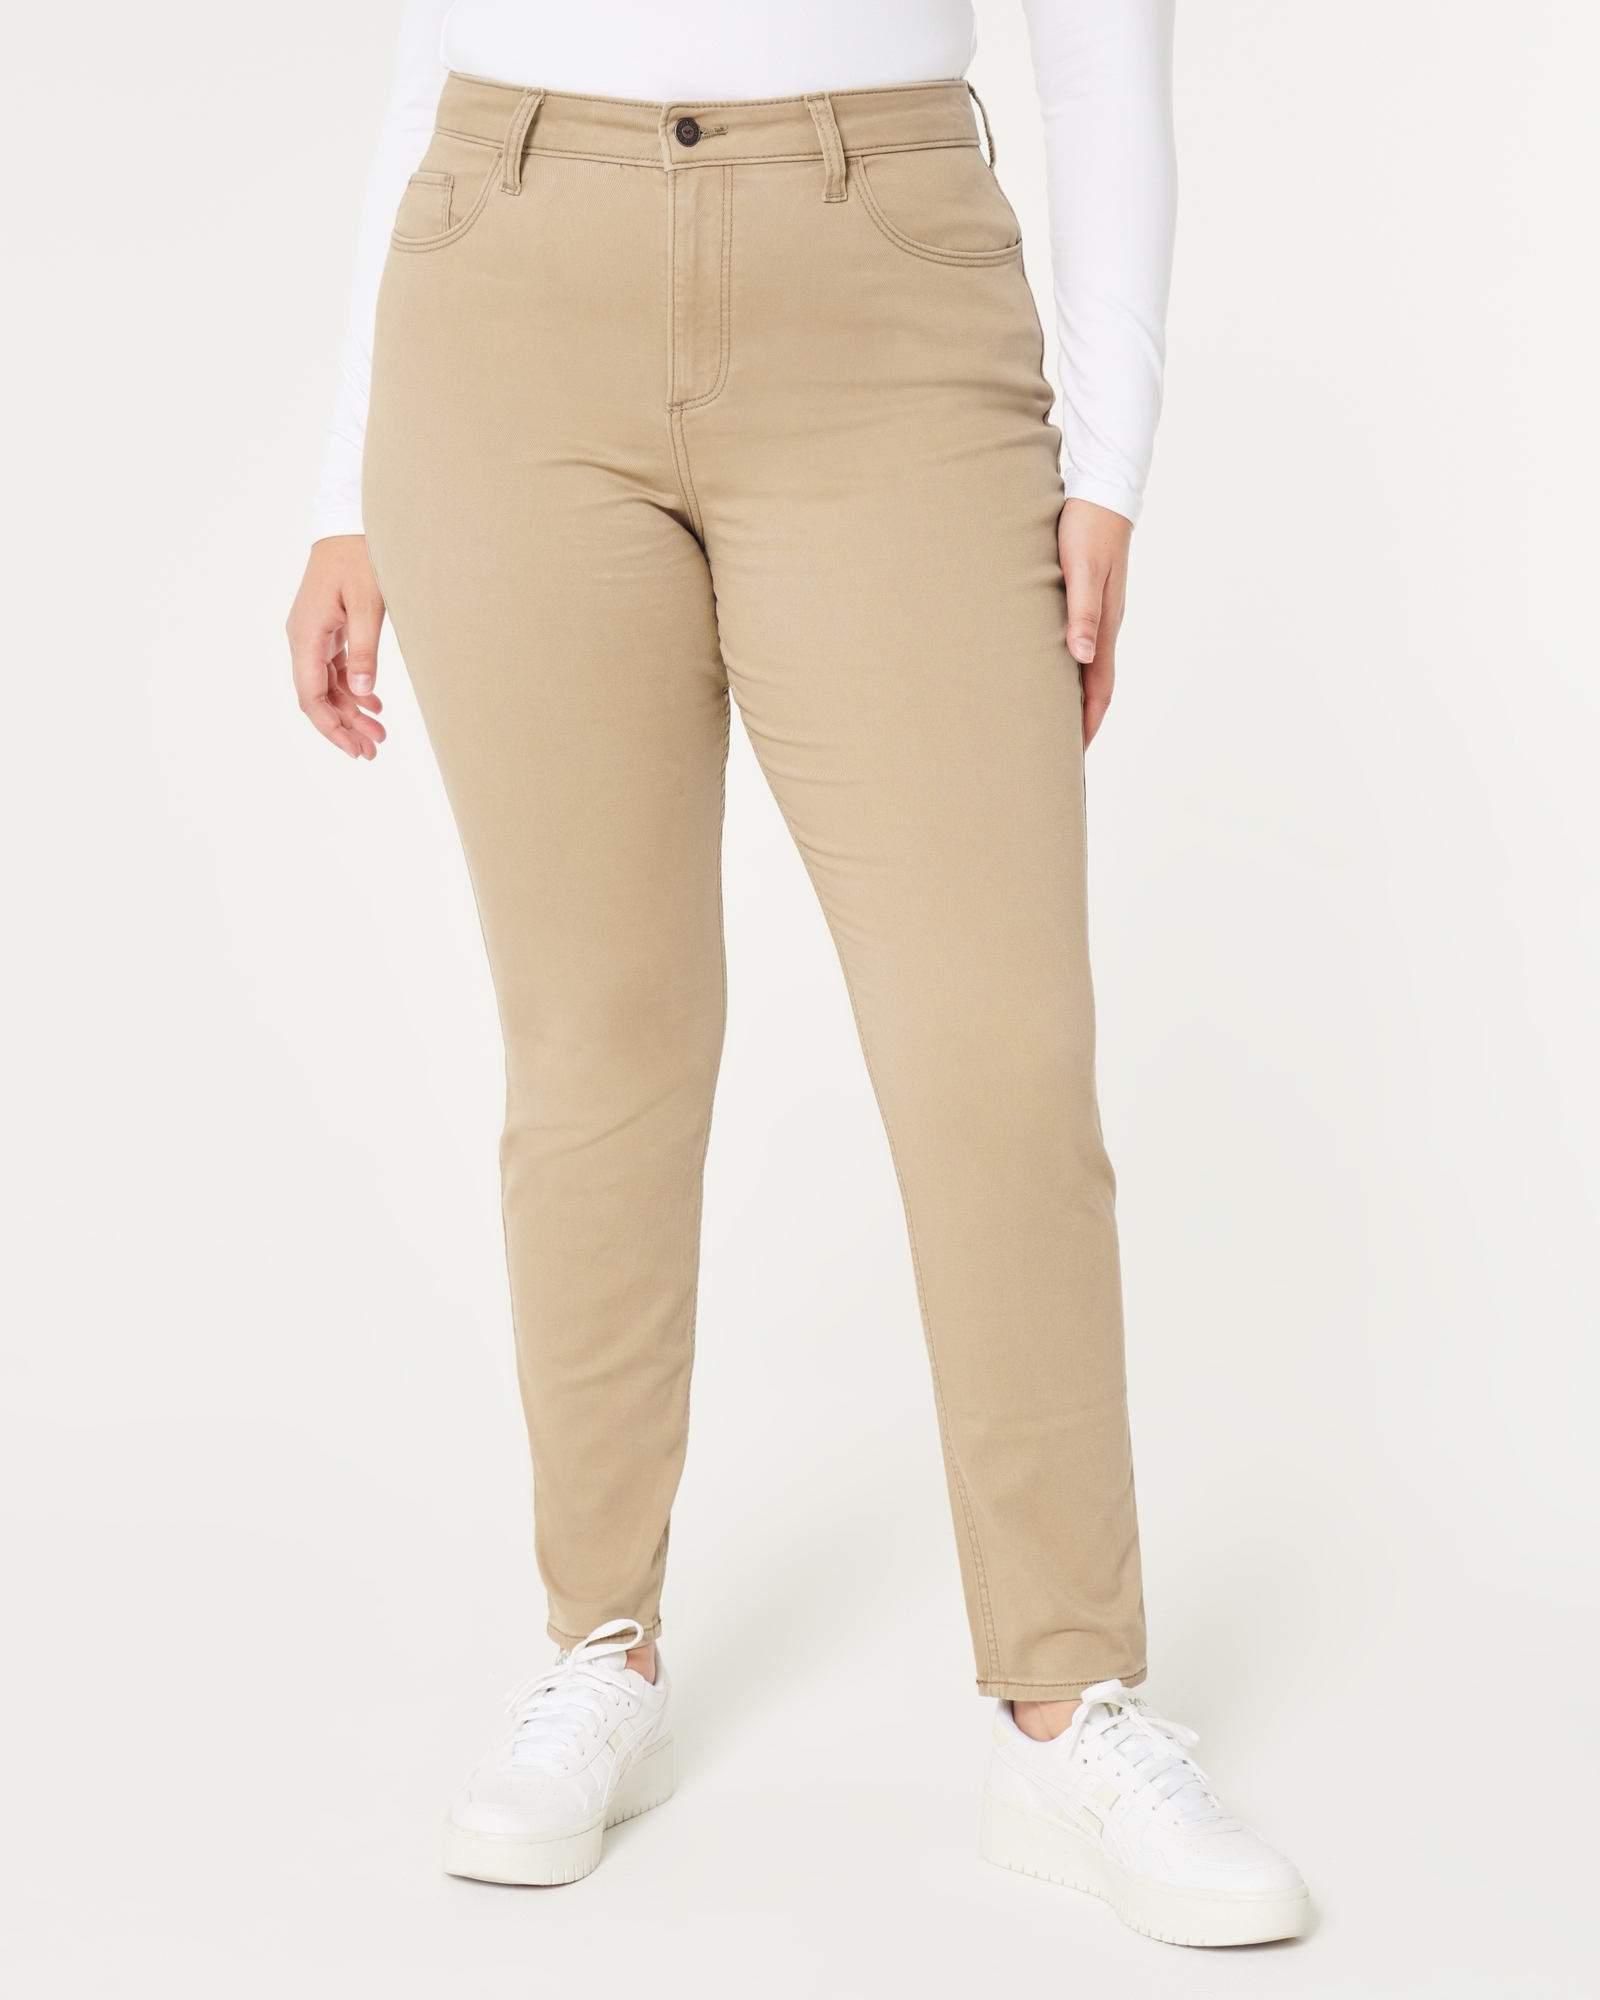 Miiyana Cuffed Ankle Pants for Women Trendy High Waist Dressy Pants with  Pockets Button Down Khaki XL at  Women's Clothing store